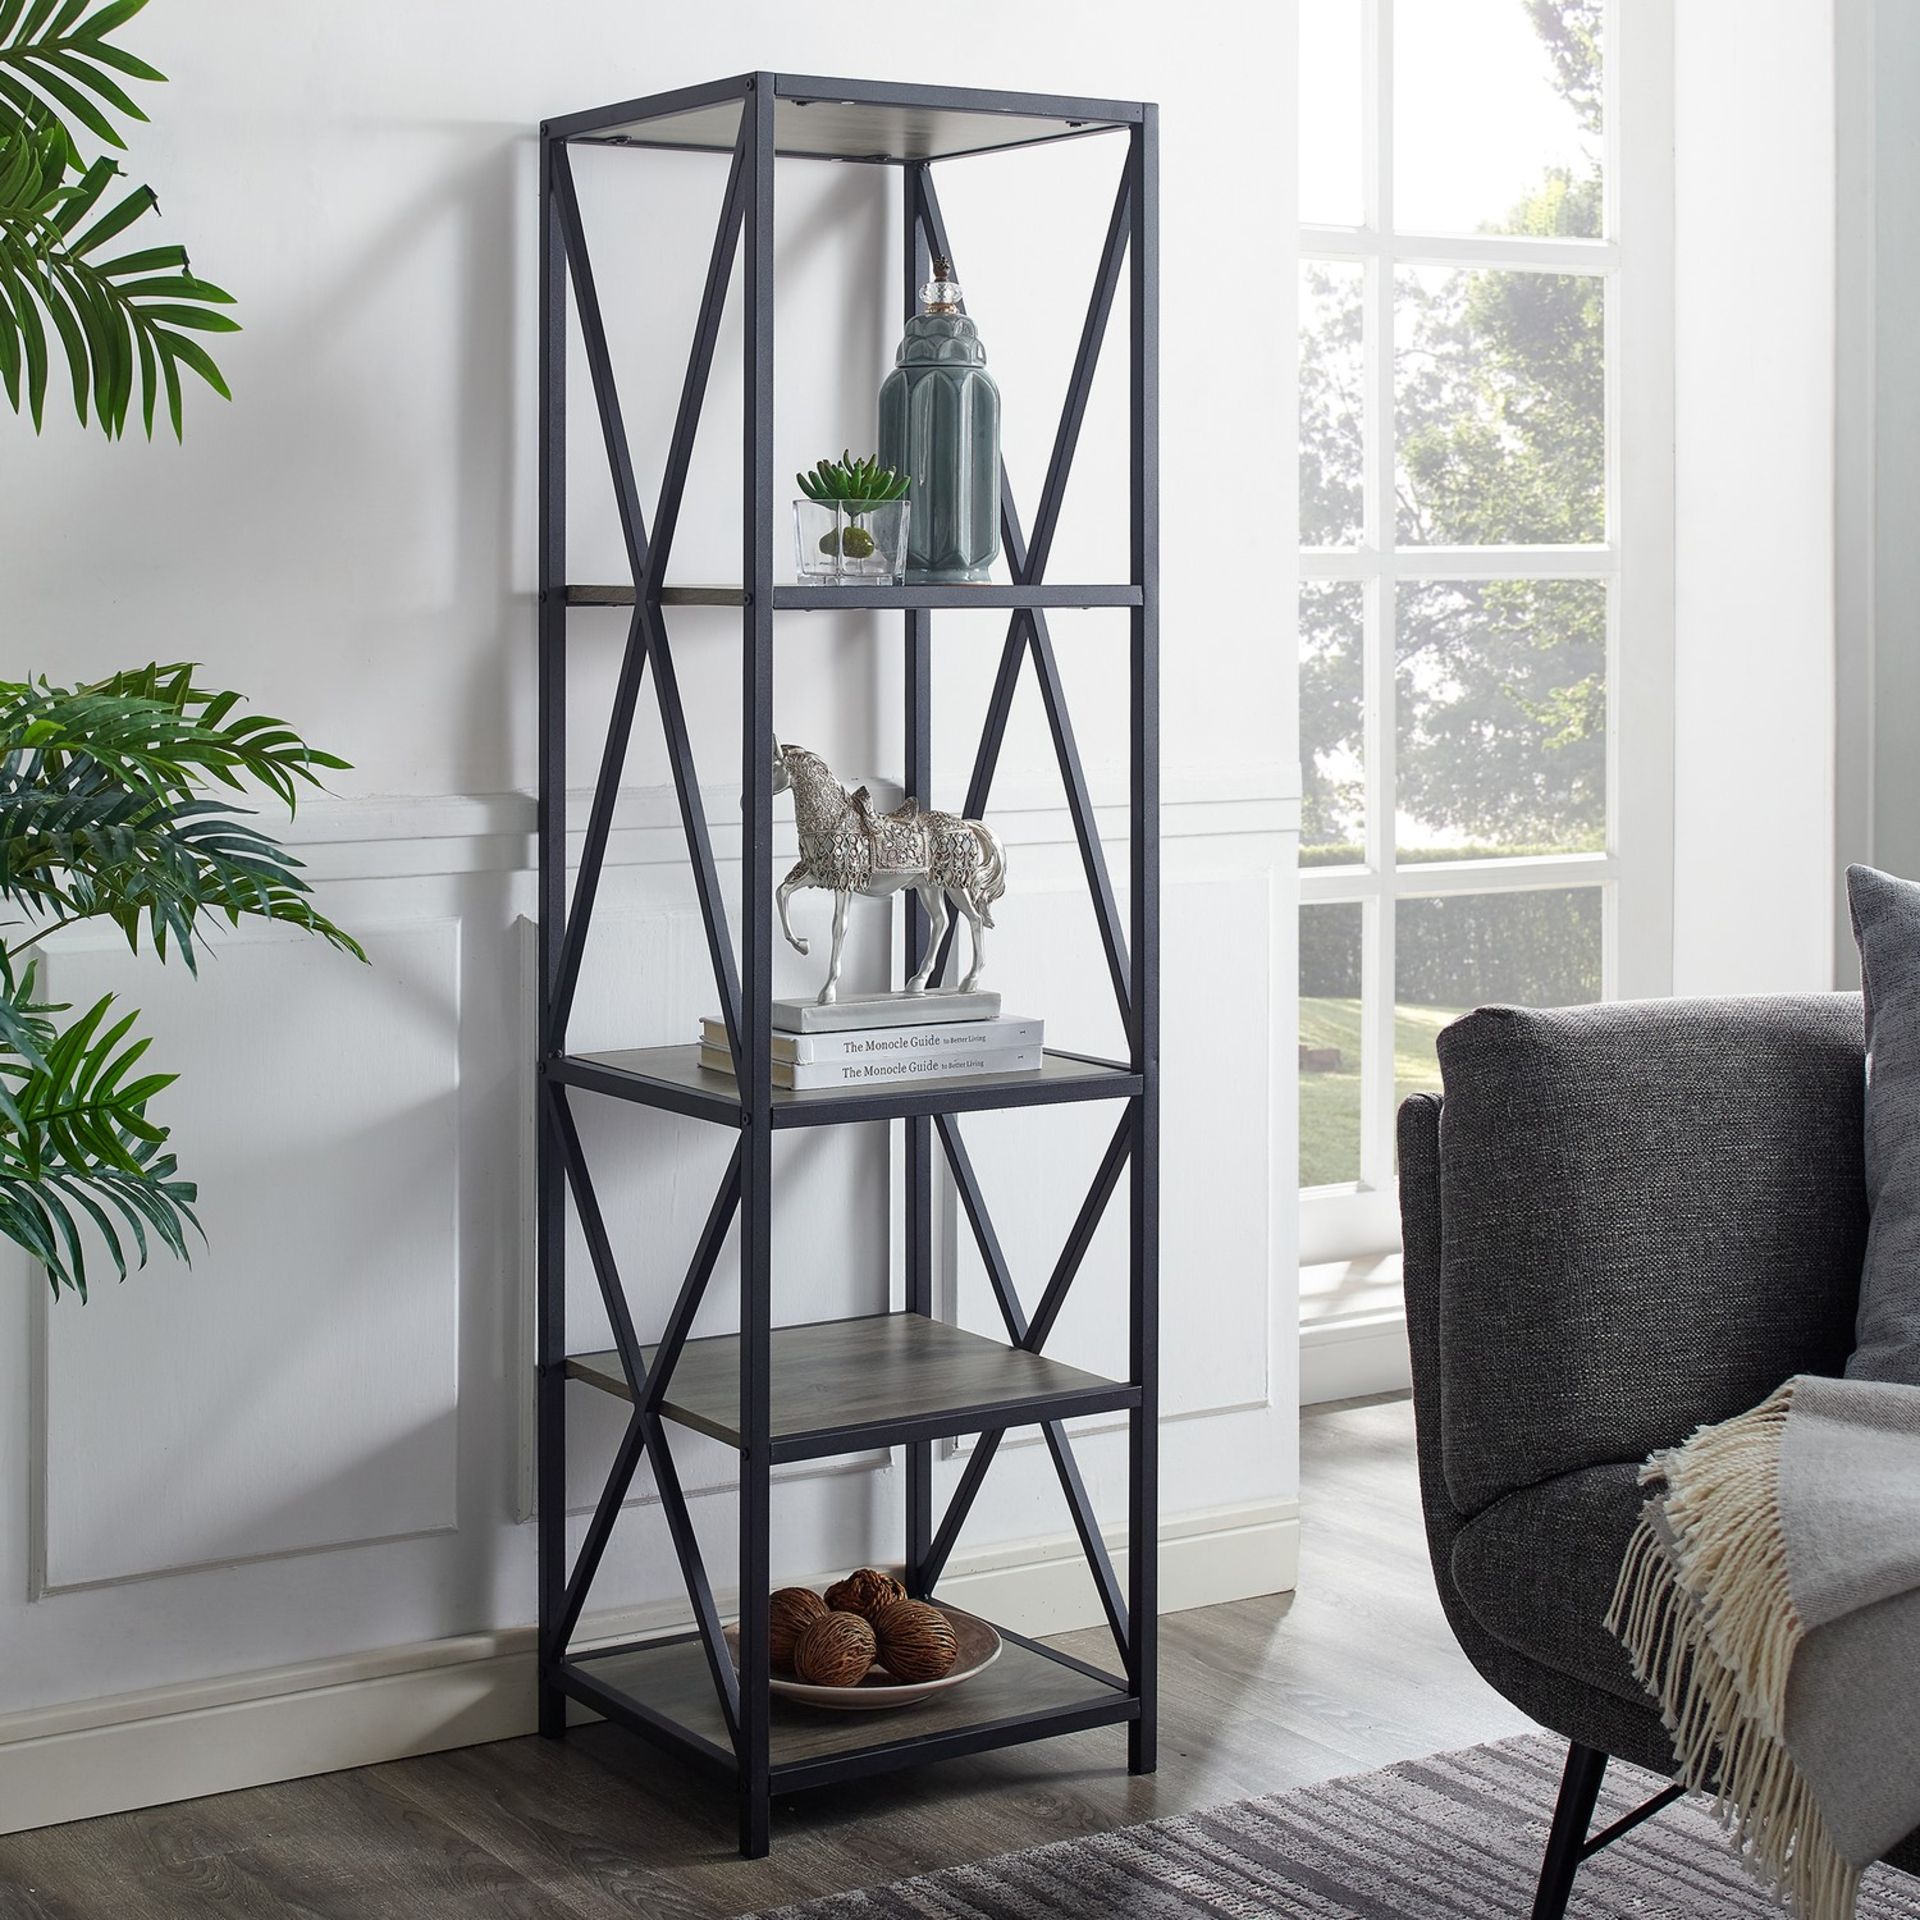 WALKER EDISON X FRAME WOOD AND METAL BOOKCASE - RRP £185